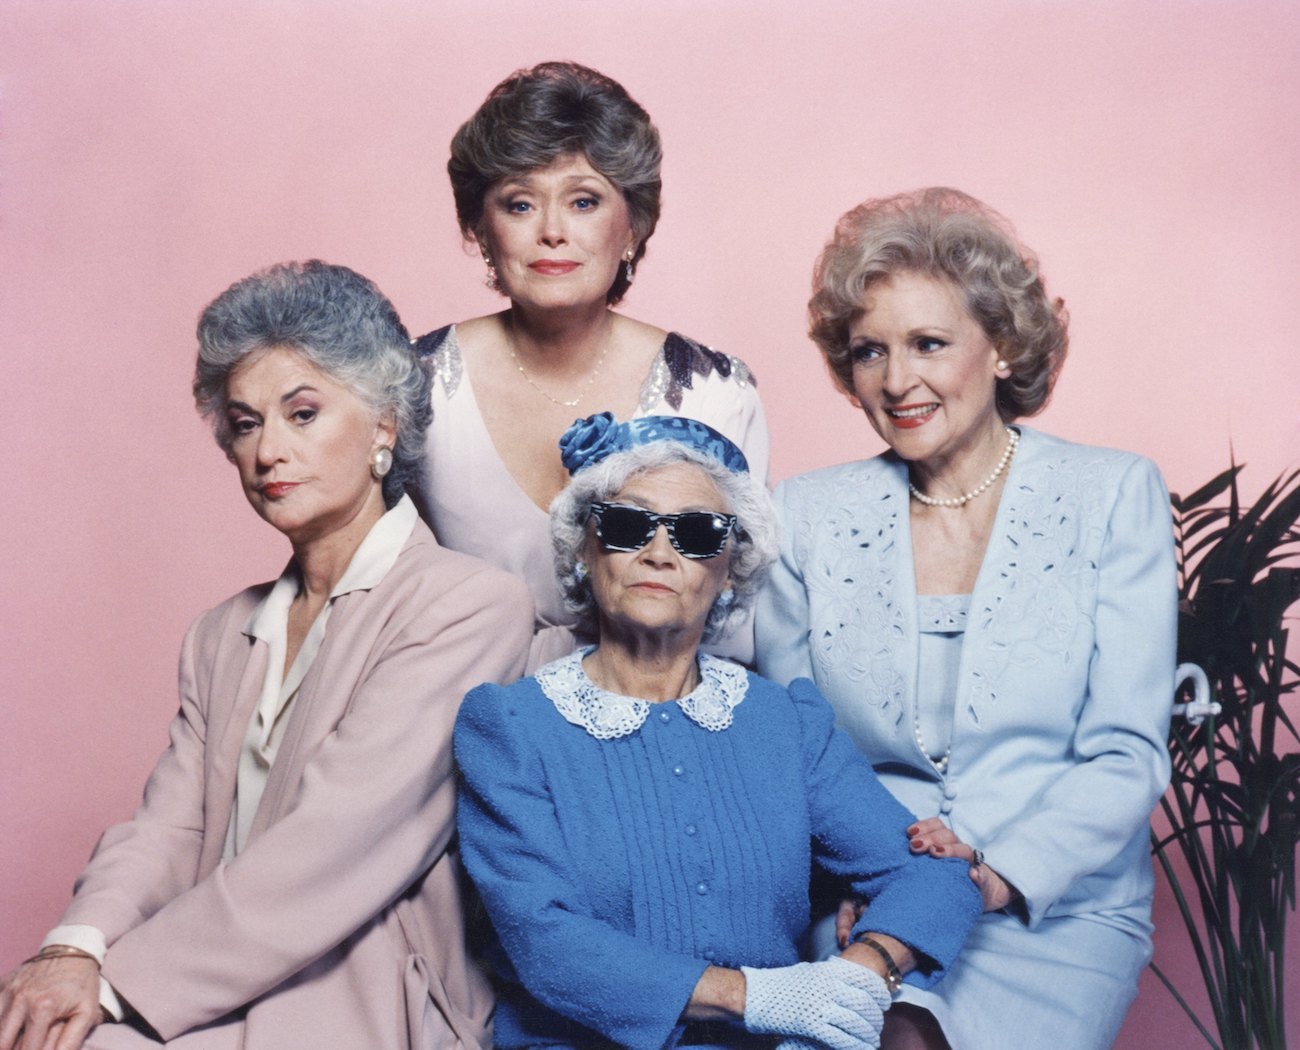 The Golden Girls cast posed for a group photo